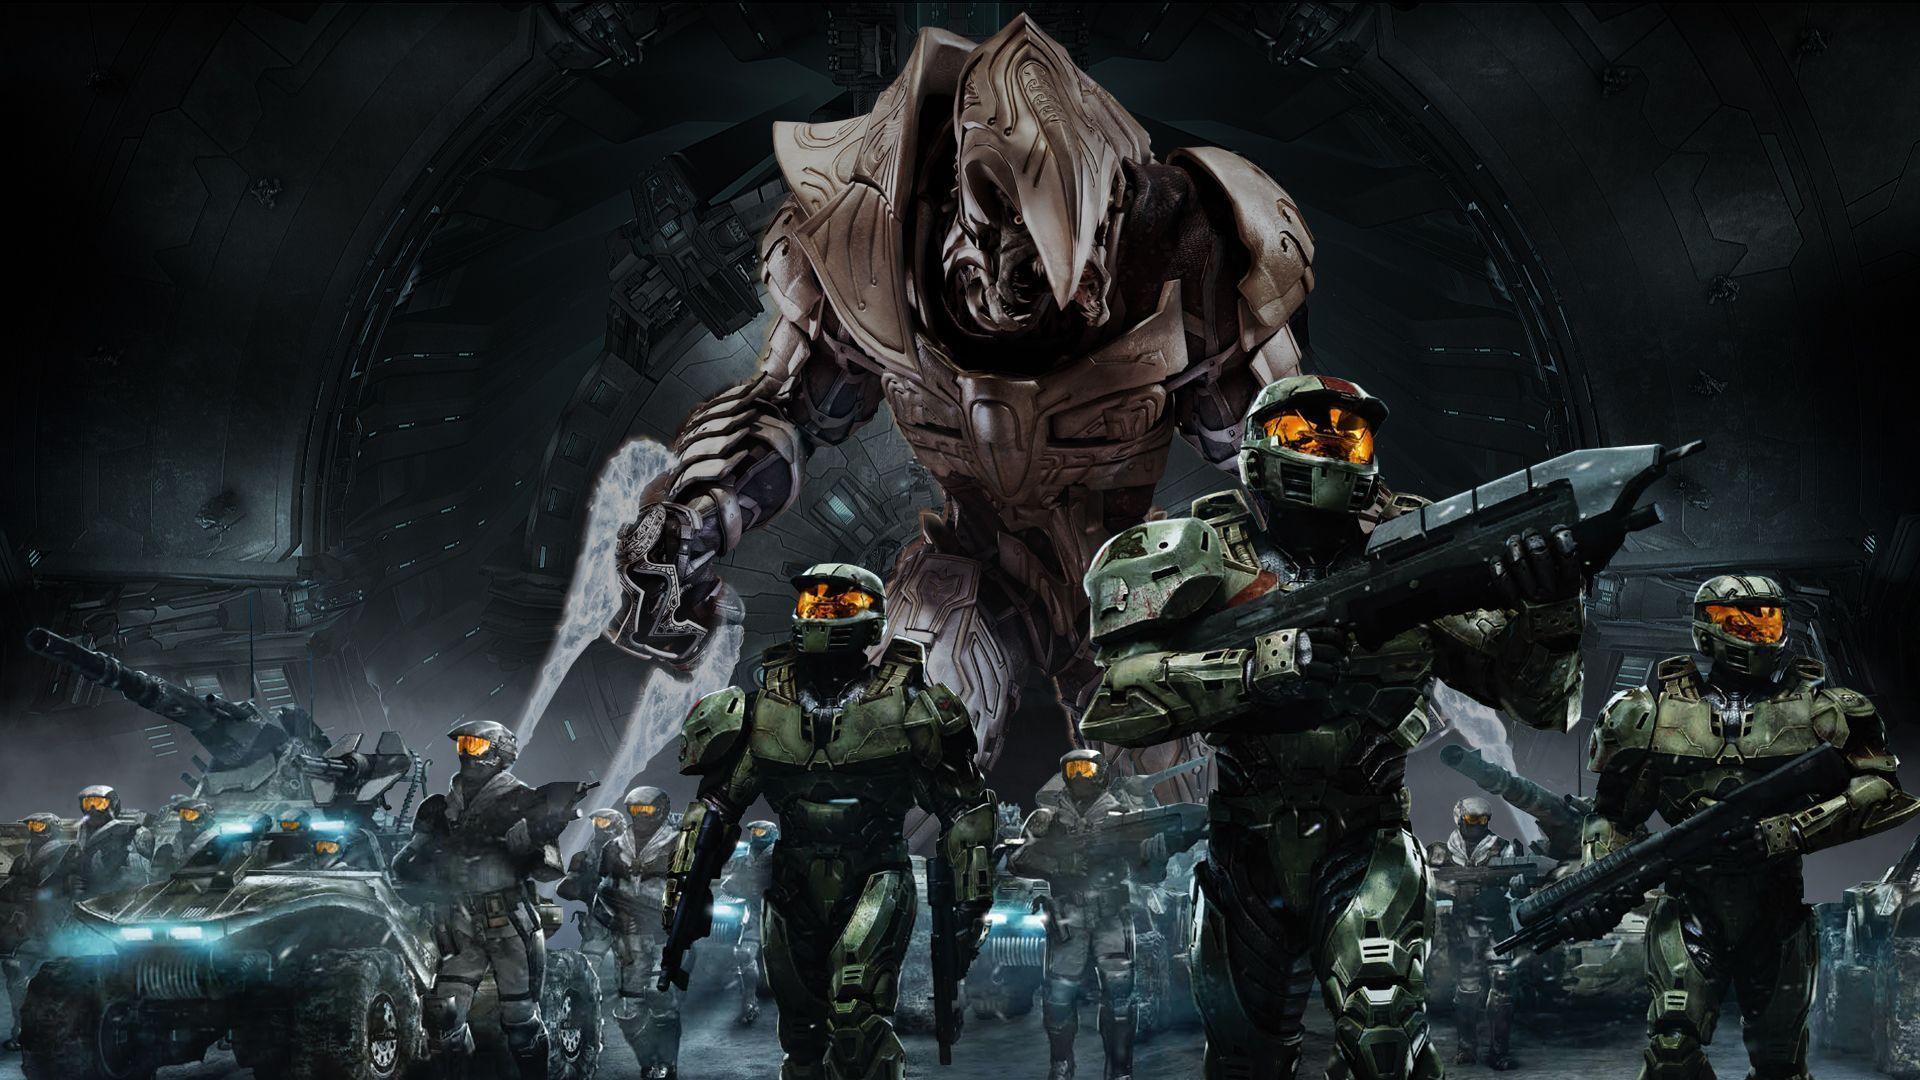 21 Halo 3 HD Wallpapers Backgrounds - Wallpaper Abyss